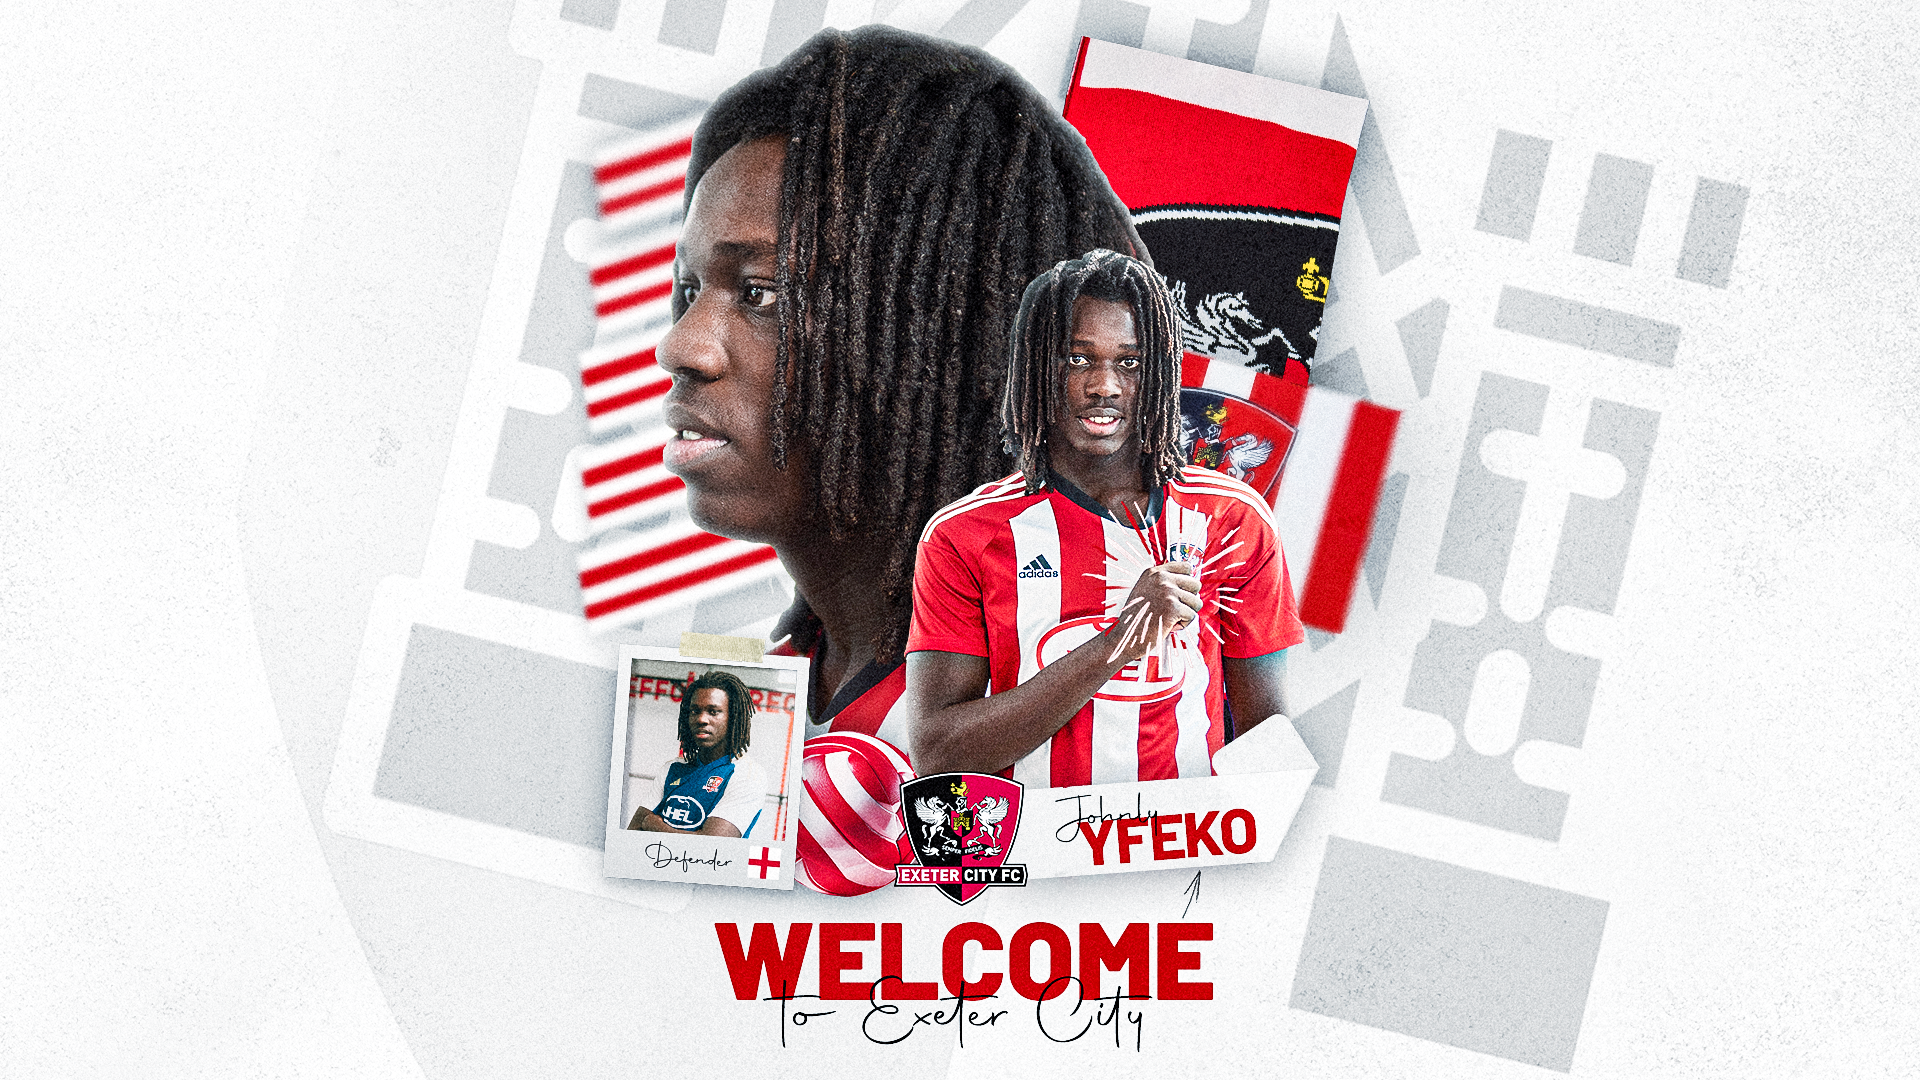 Welcome to Exeter City, Johnly 